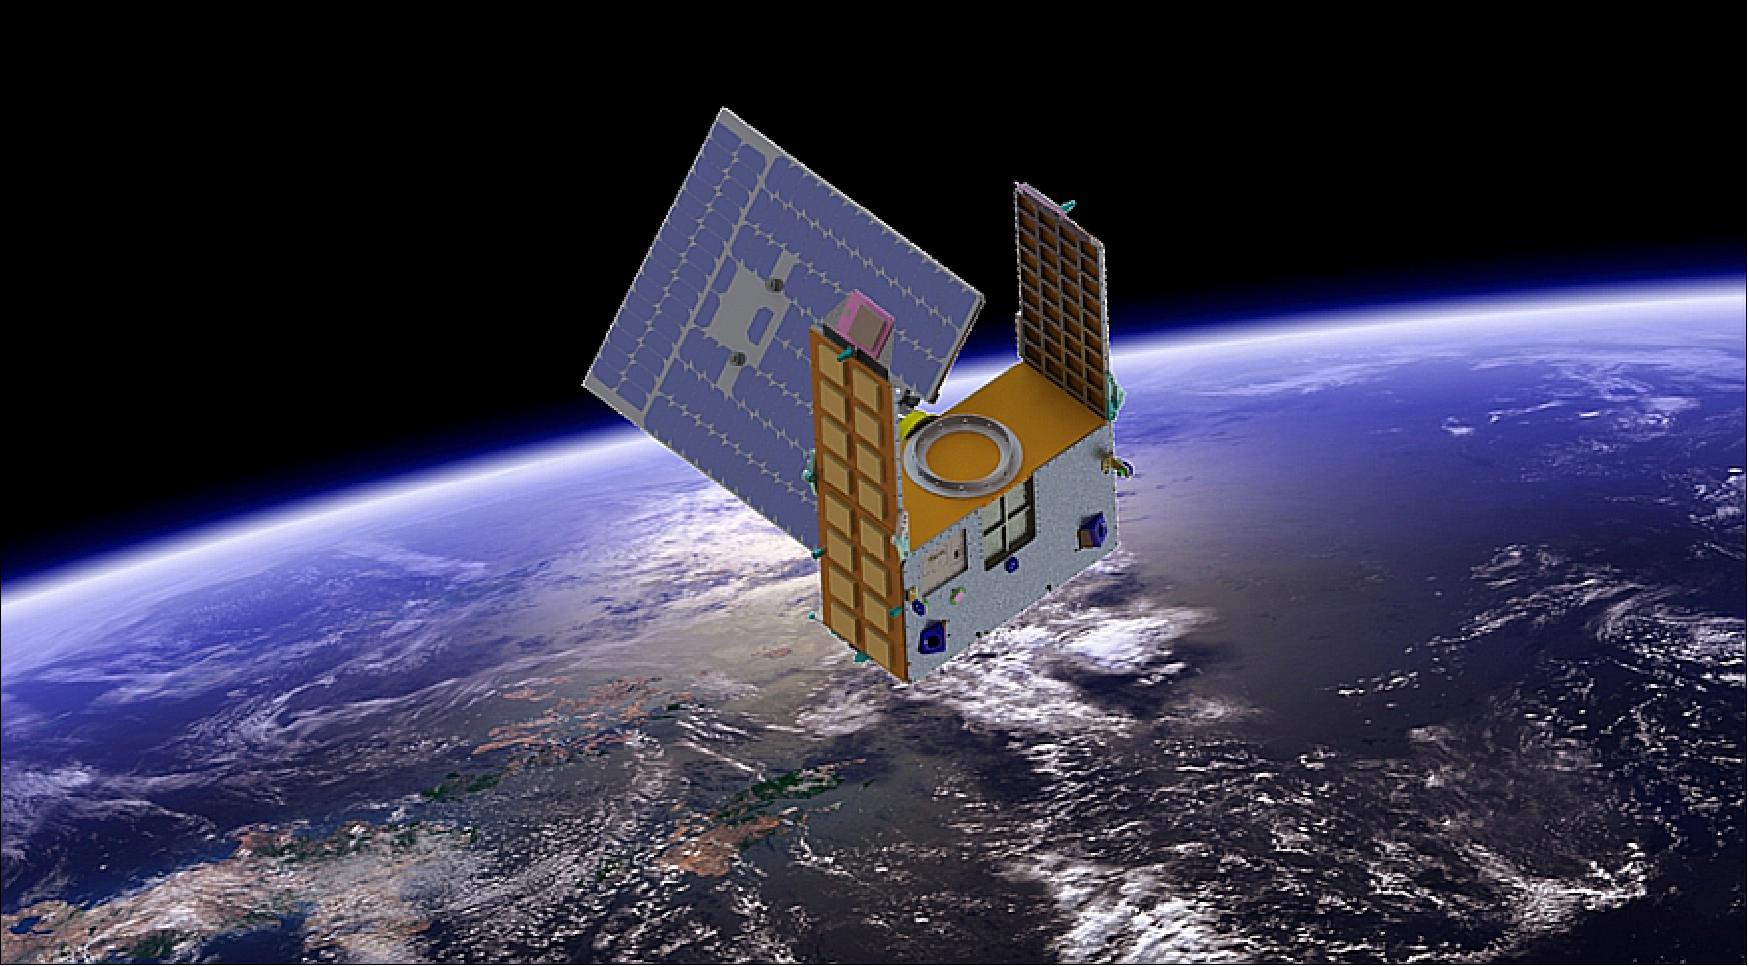 Figure 2: Artist's rendition of the first PlanetiQ satellite GNOMES-1 (GNSS Navigation and Occultation Measurement Satellite-1) in orbit (image credit: PlanetiQ)